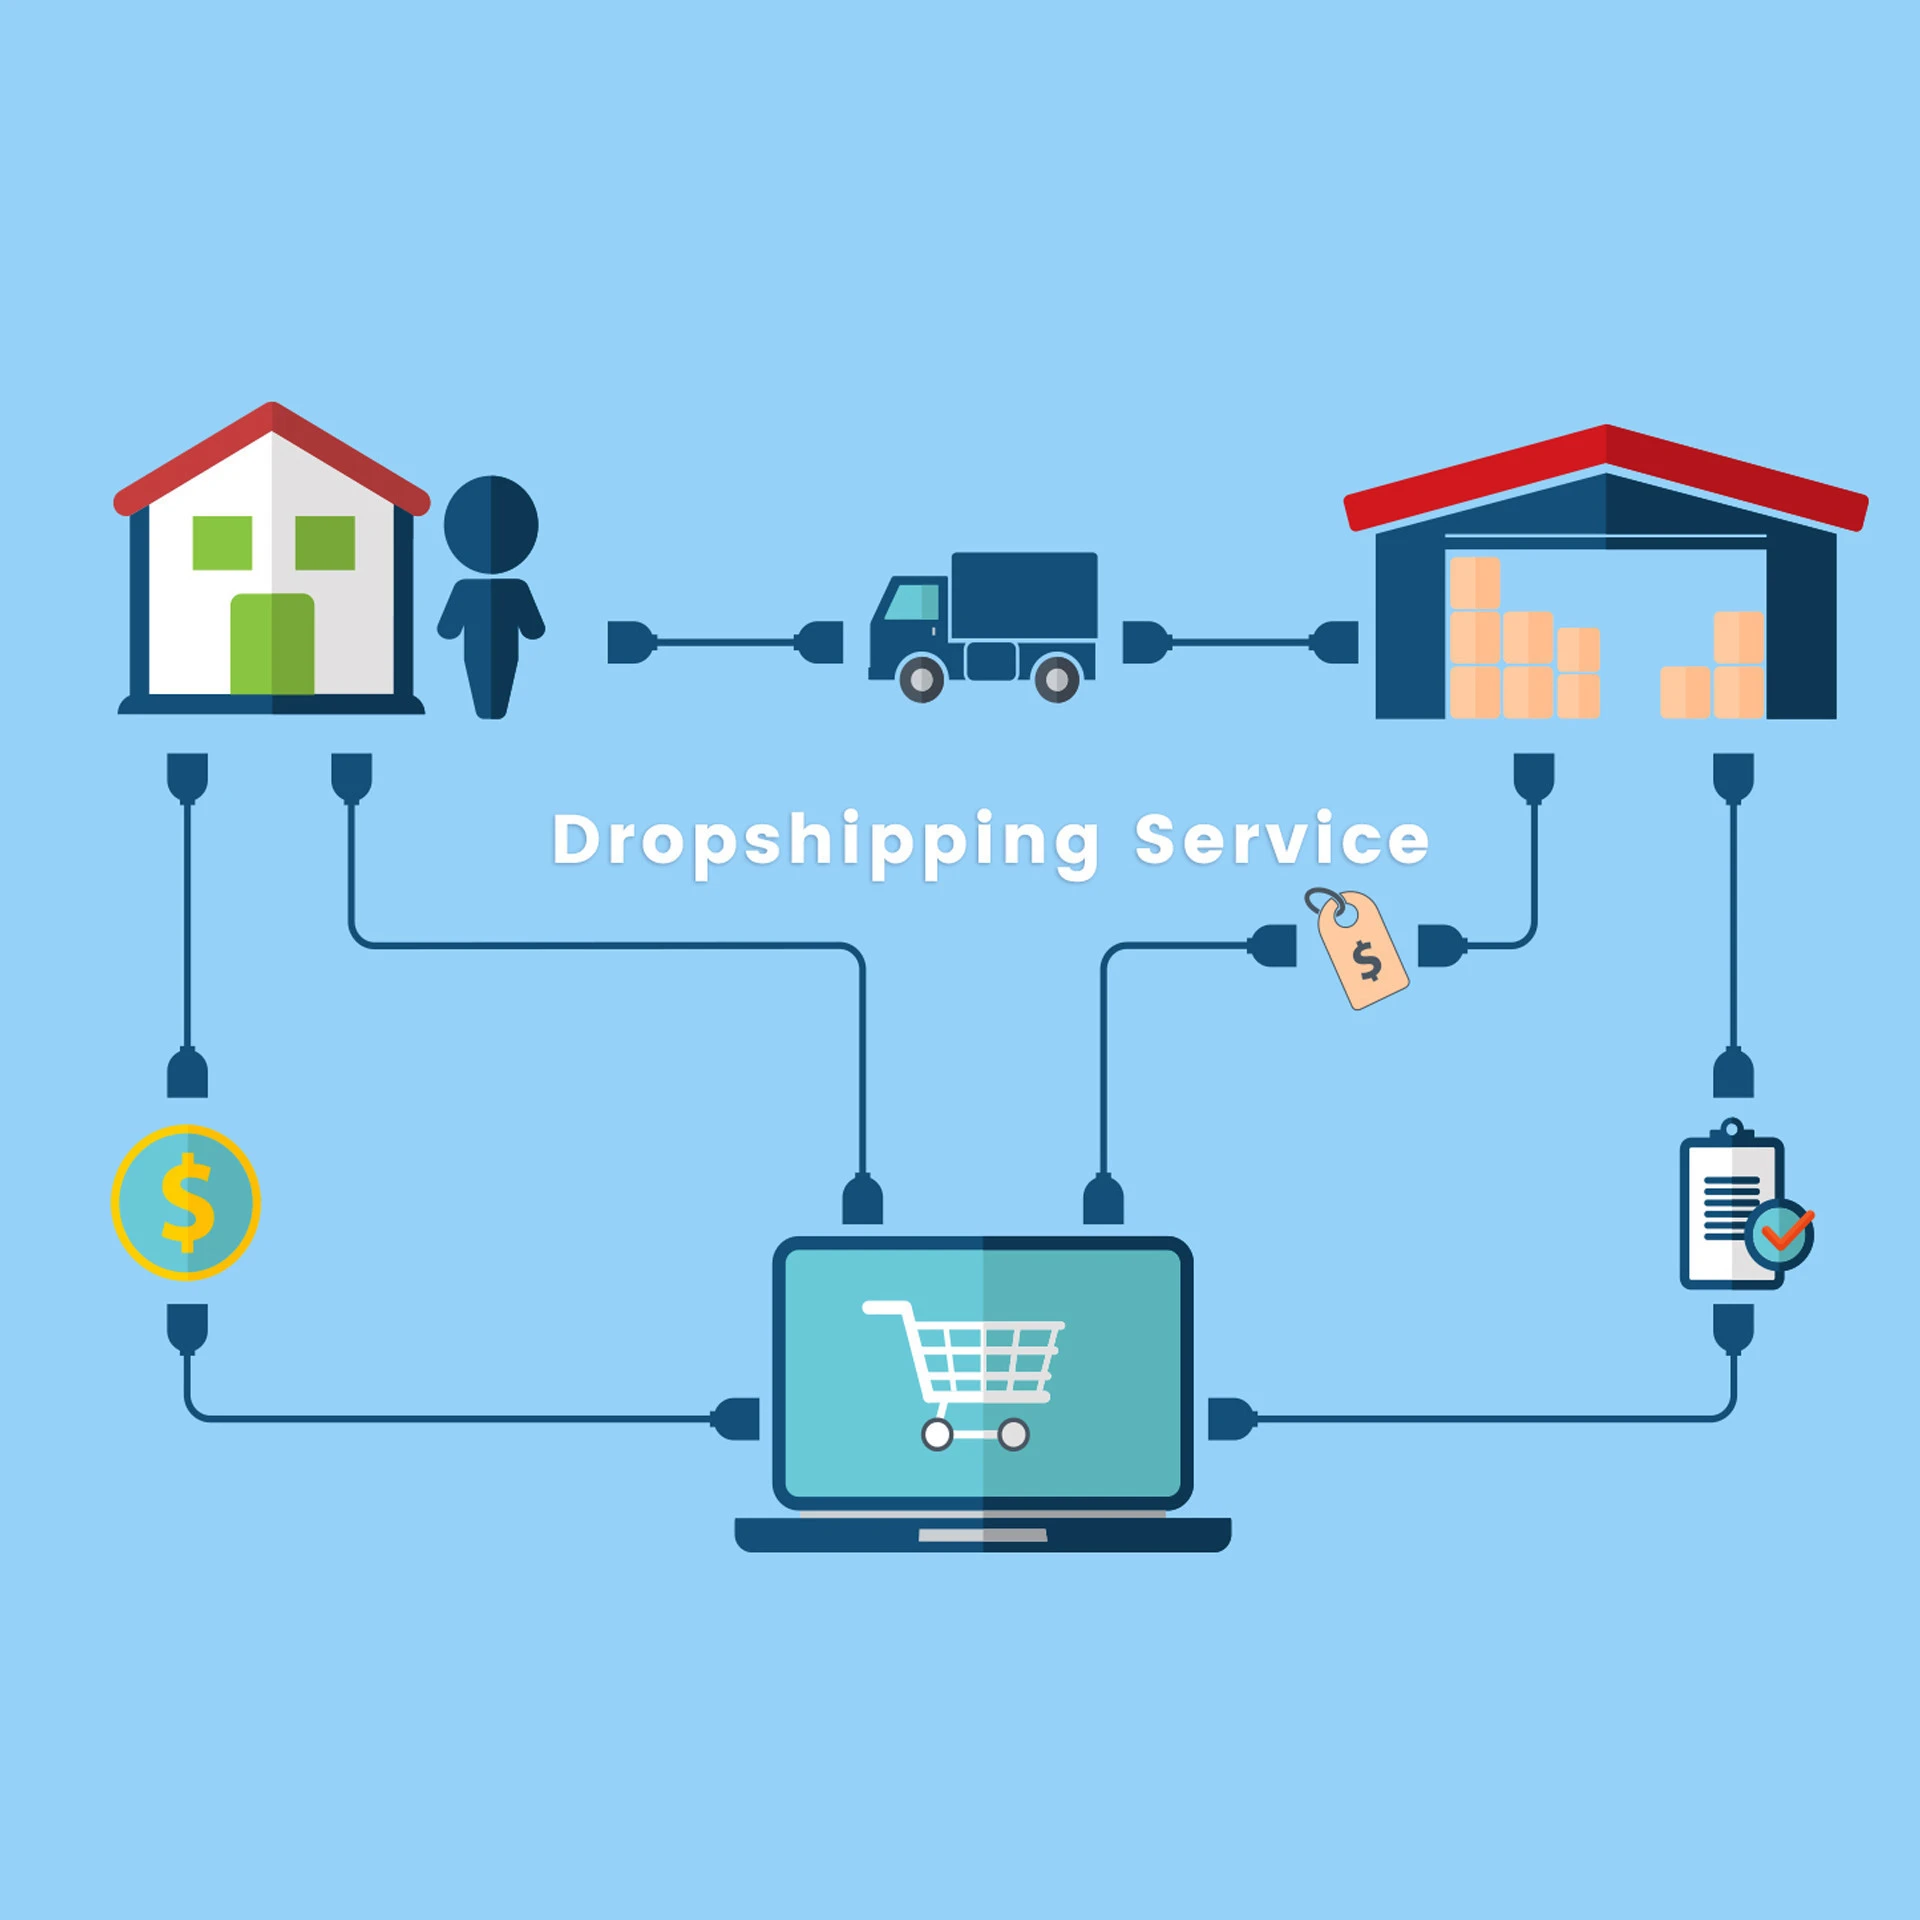 Dropshipping Agent in Hangzhou and 1688 Agent  with Free Warehouse and Order Fulfillment Services from China to Worldwide